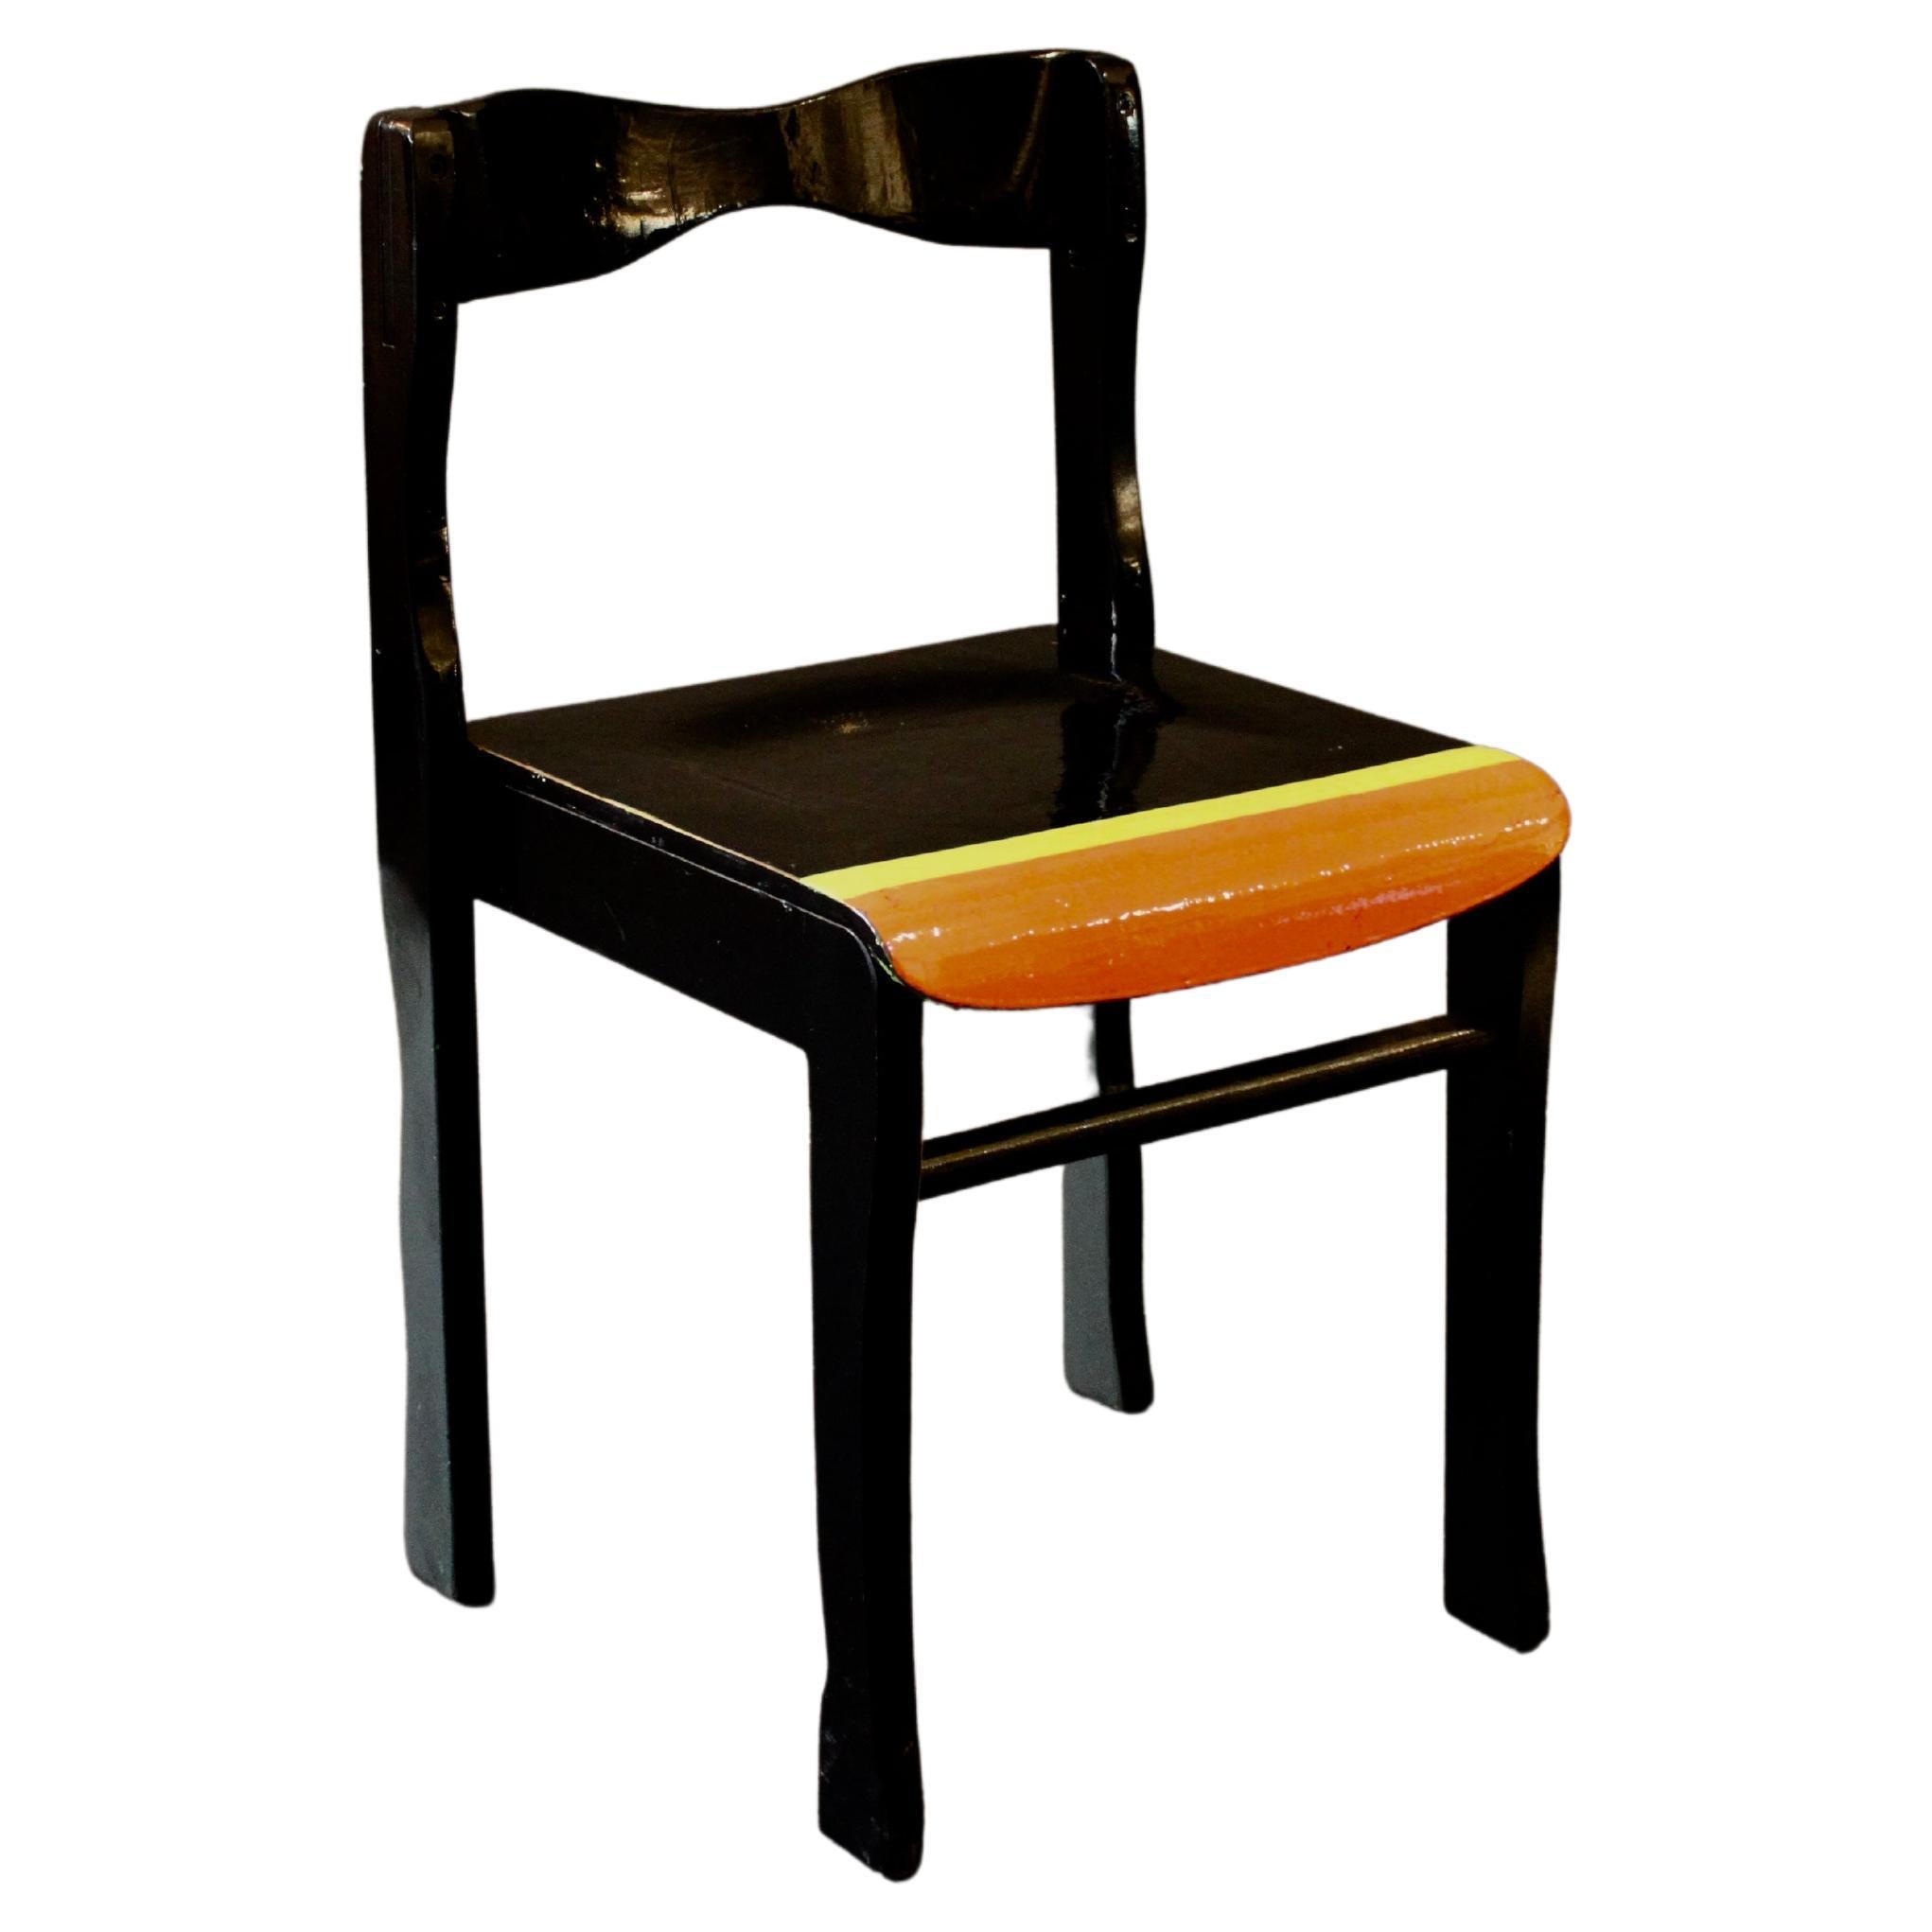 almost black, chair by german artist Markus Friedrich Staab 2011 For Sale